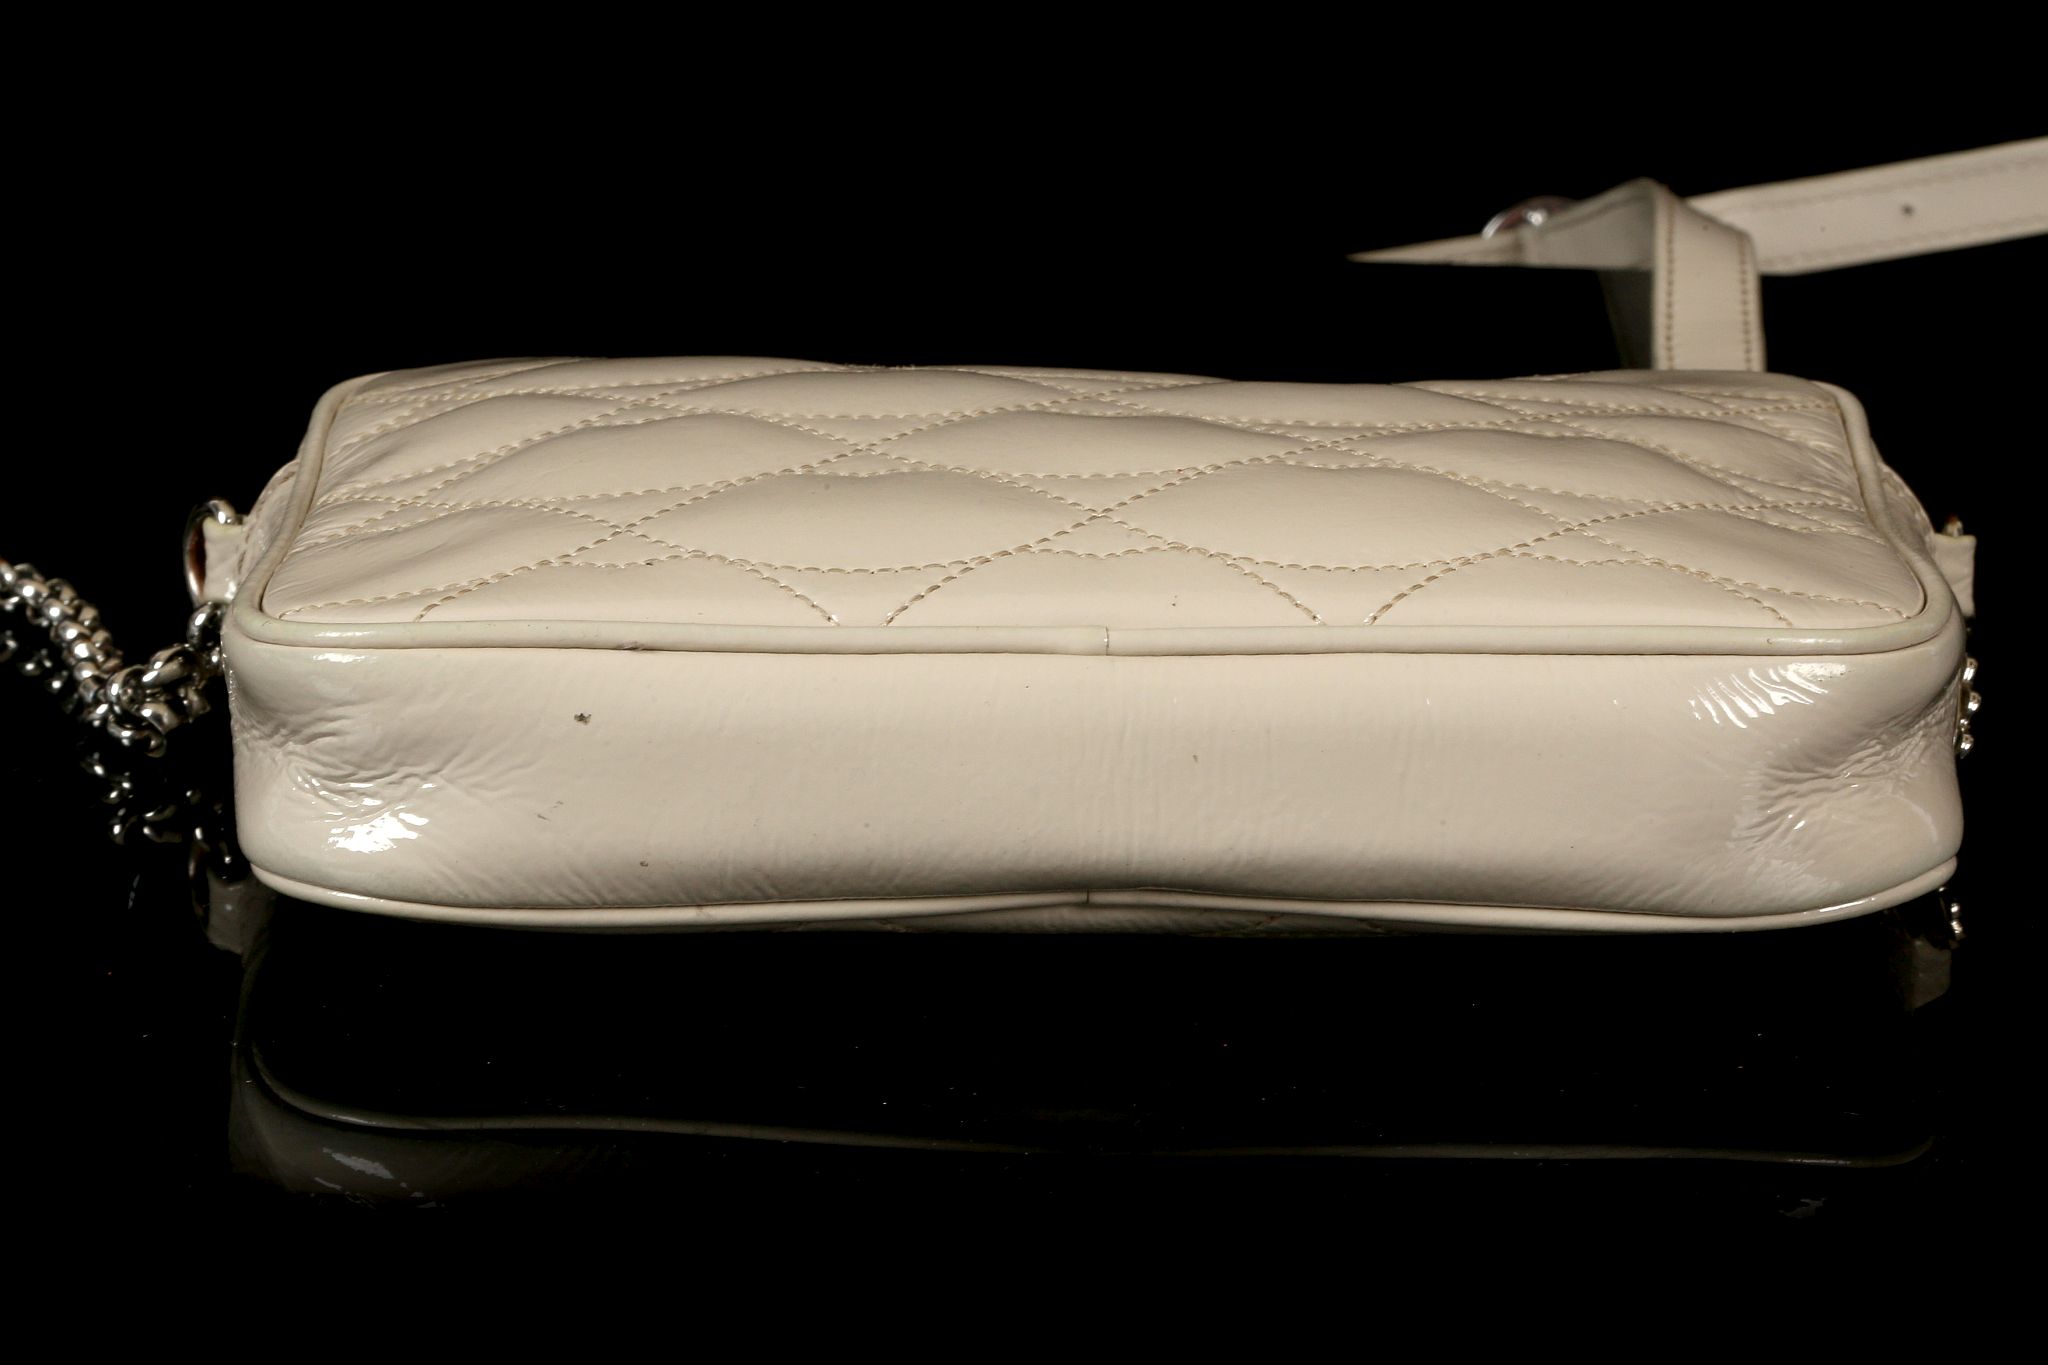 LULU GUINNESS LIPS HANDBAG, beige patent leather with stitched lips pattern, silver tone hardware, - Image 8 of 12